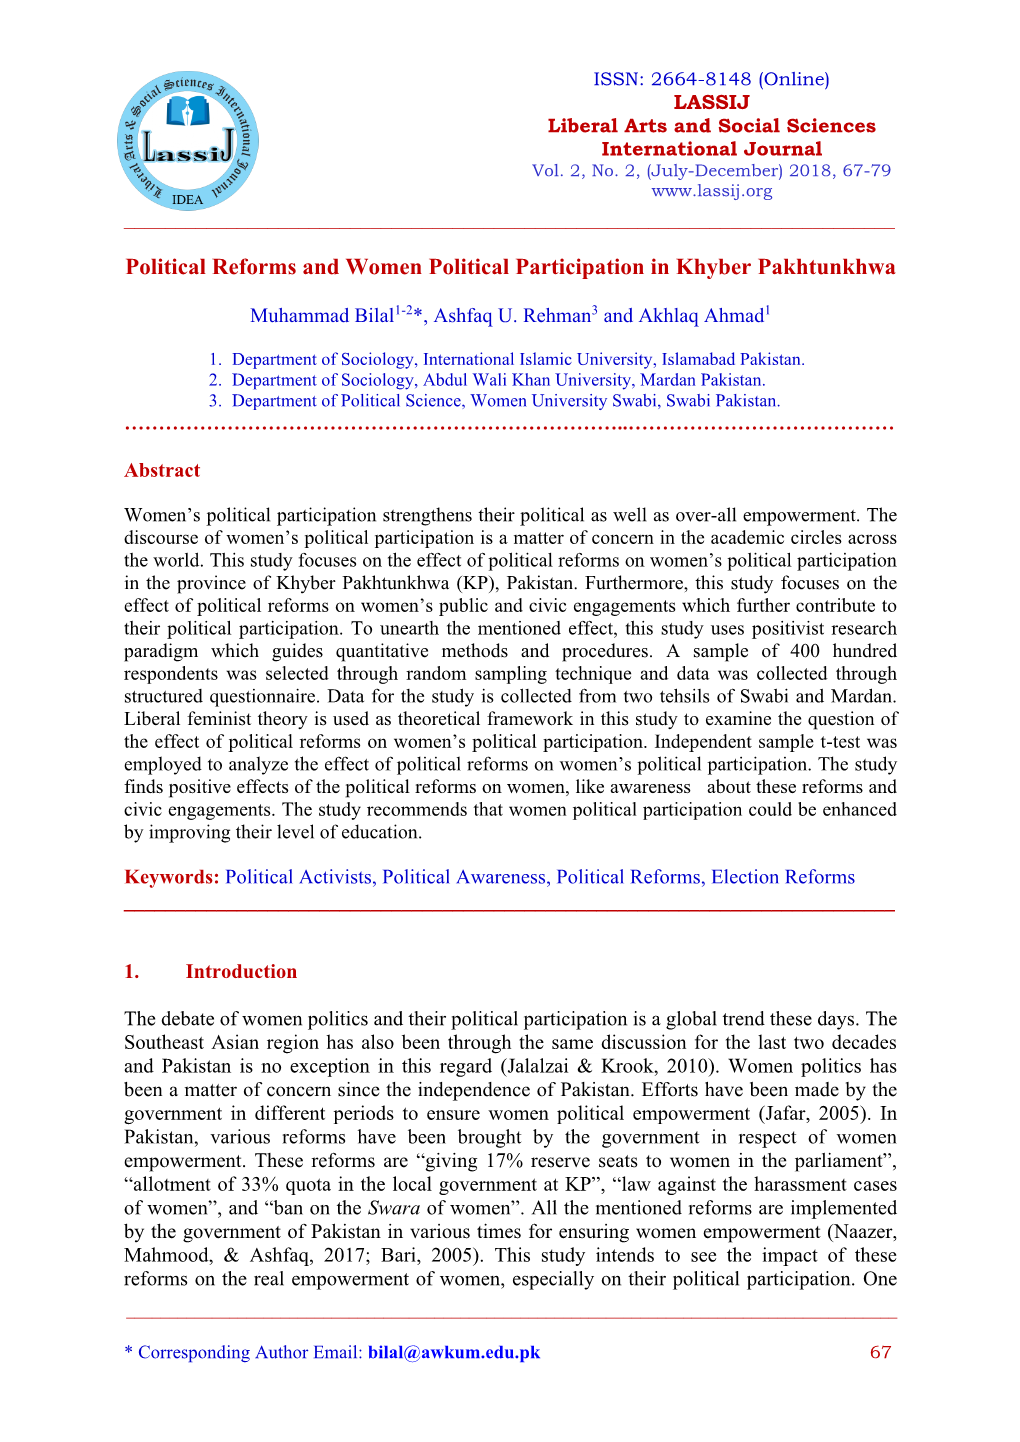 Political Reforms and Women Political Participation in Khyber Pakhtunkhwa